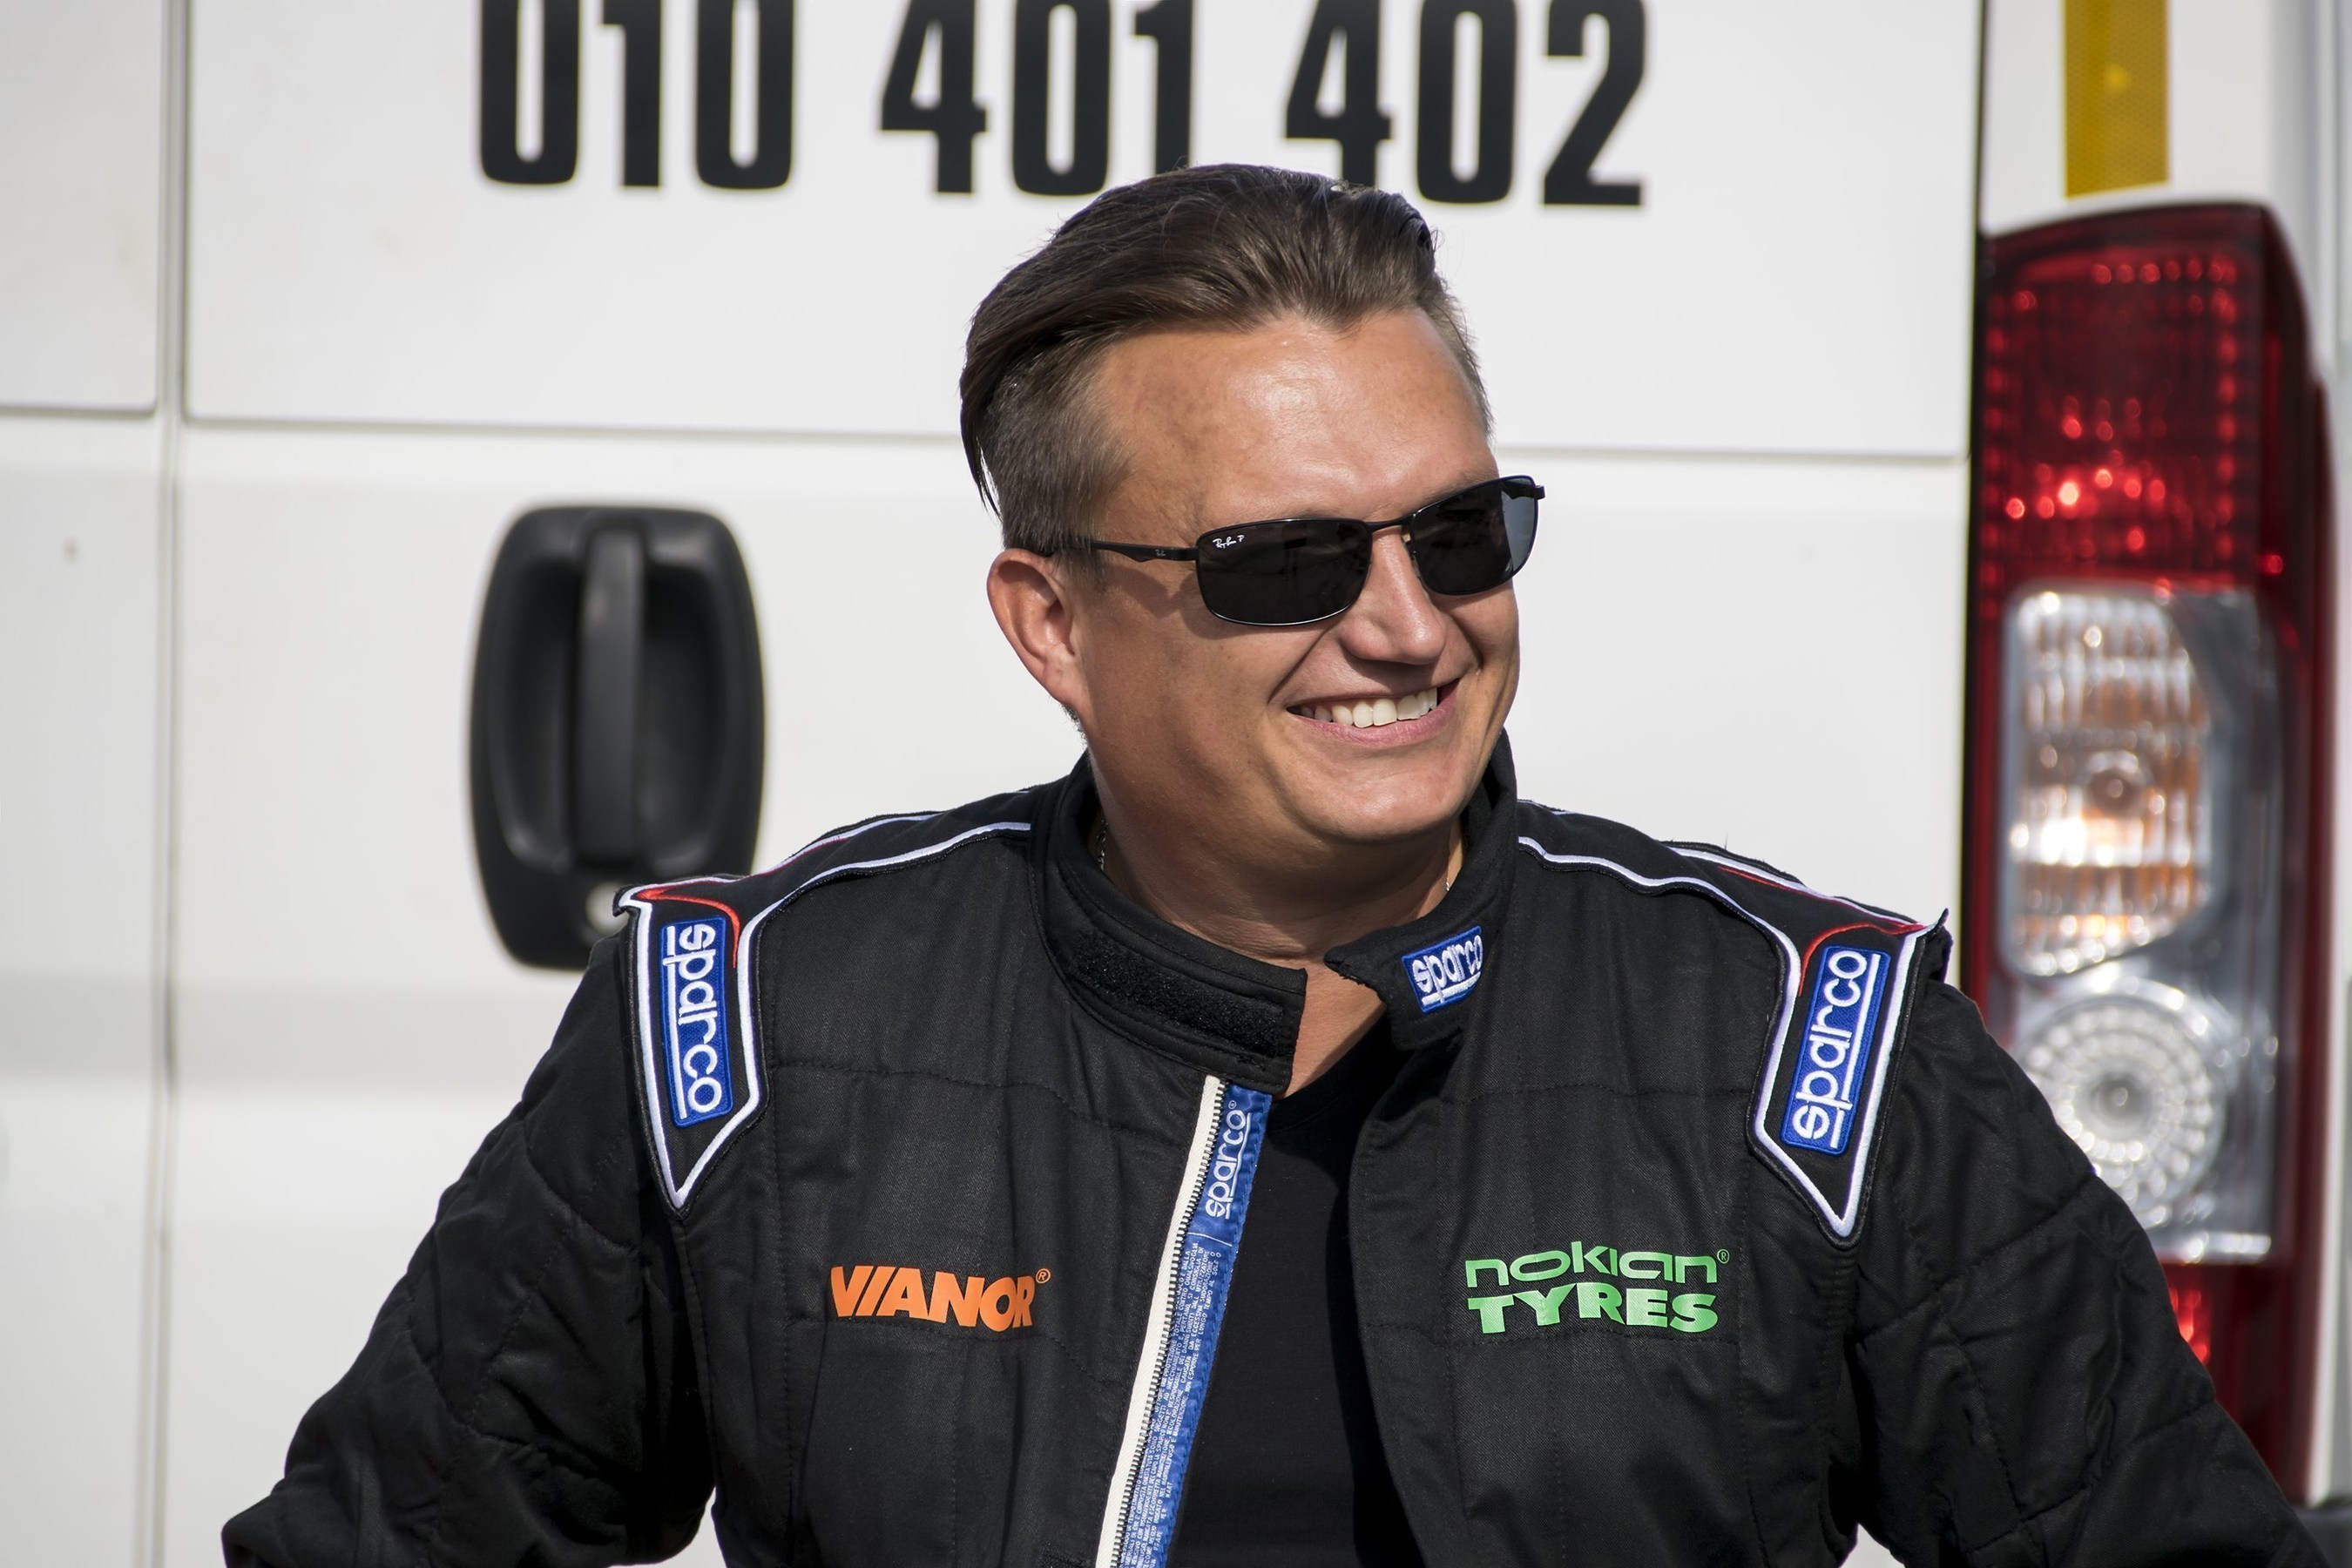 Stunt driver Vesa Kivimäki. The new world record for fastest side wheelie in a car was achieved by Nokian Tyres, when stunt driver Vesa Kivimäki drove at a speed of 186,269 kilometers per hour (115.742 mph) at Seinäjoki Airport on 31 August. "I hope to be able to do my part towards developing even safer tyres, says Vesa Kivimäki, the holder of a new world record." More: www.nokiantyres.com/fastestwheelie (PRNewsFoto/Nokian Tyres)